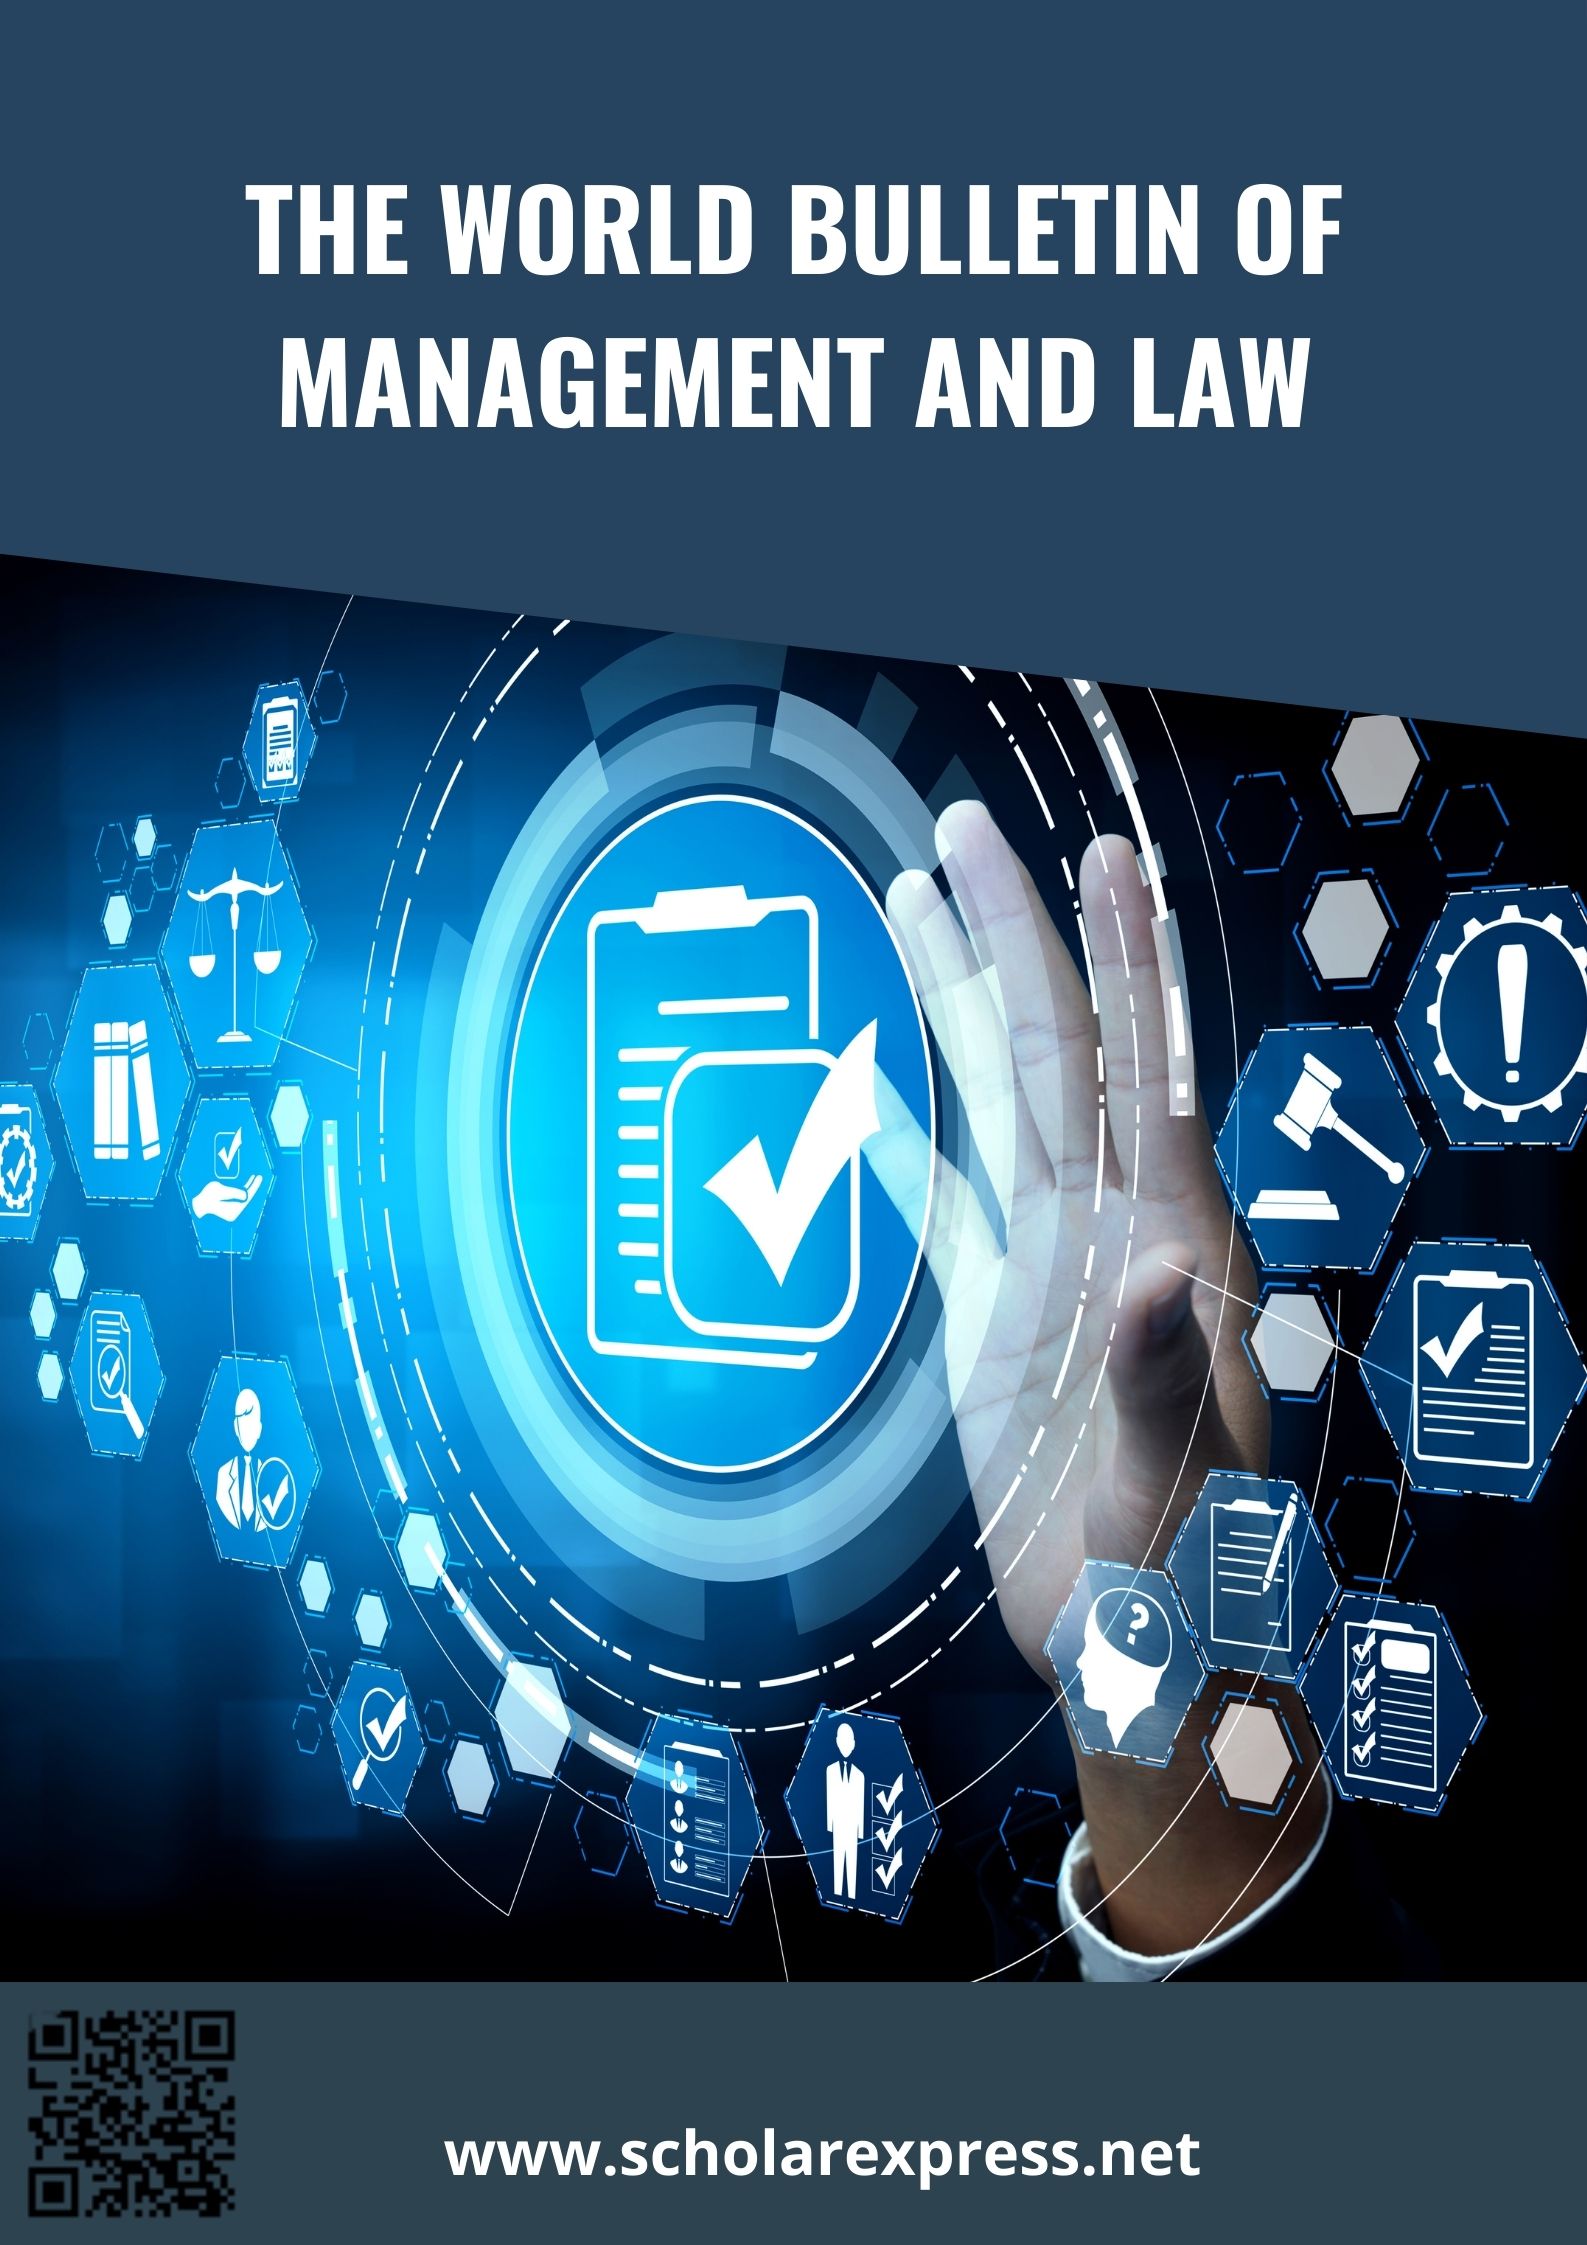 The World Bulletin of Management and Law (WBML)